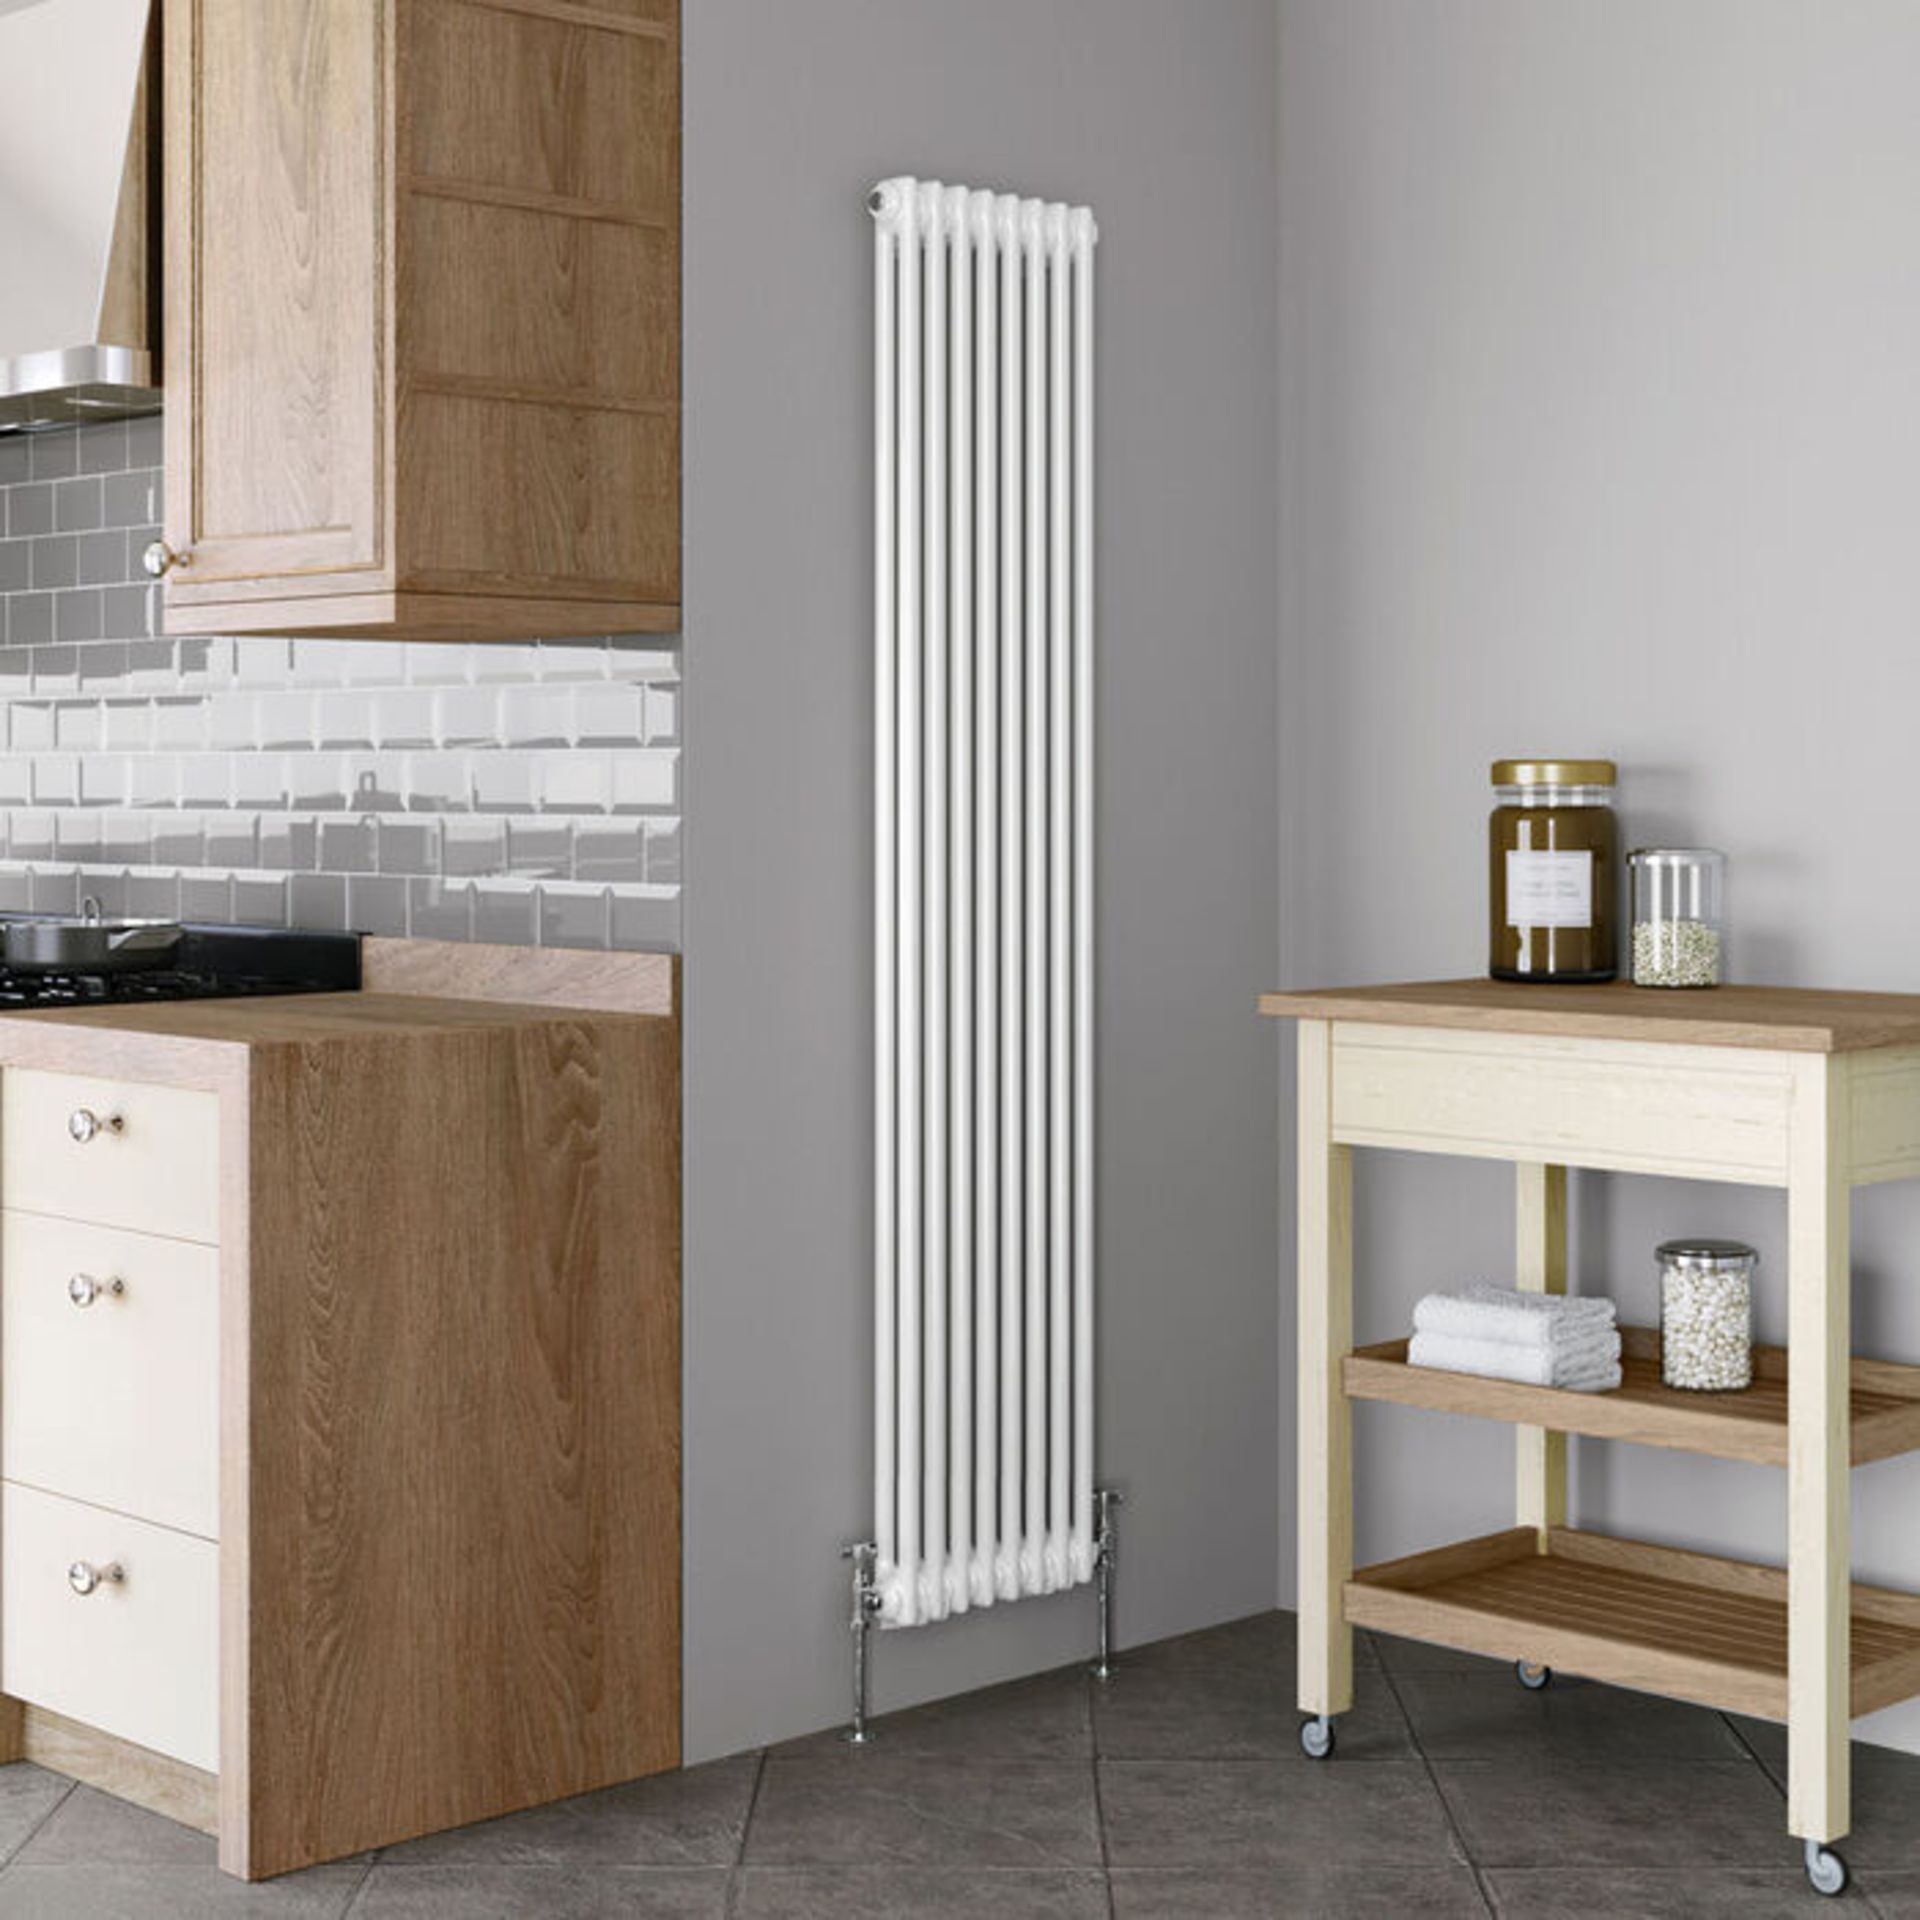 (RR86) 2000x490mm White Double Panel Vertical Colosseum Traditional Radiator. RRP £479.99.For ...(( - Image 2 of 3